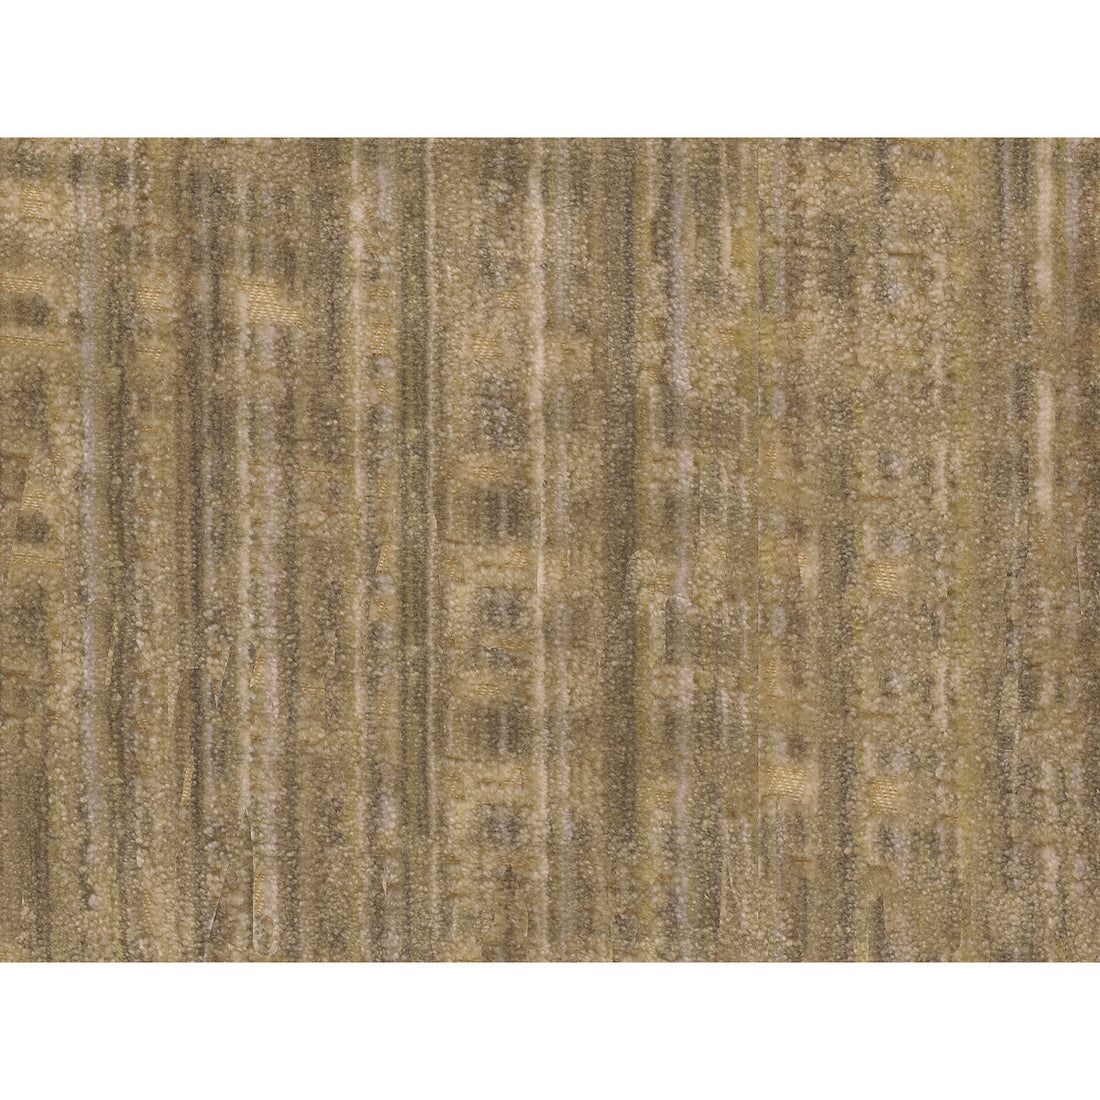 New Ideas fabric in stone color - pattern 34441.1611.0 - by Kravet Couture